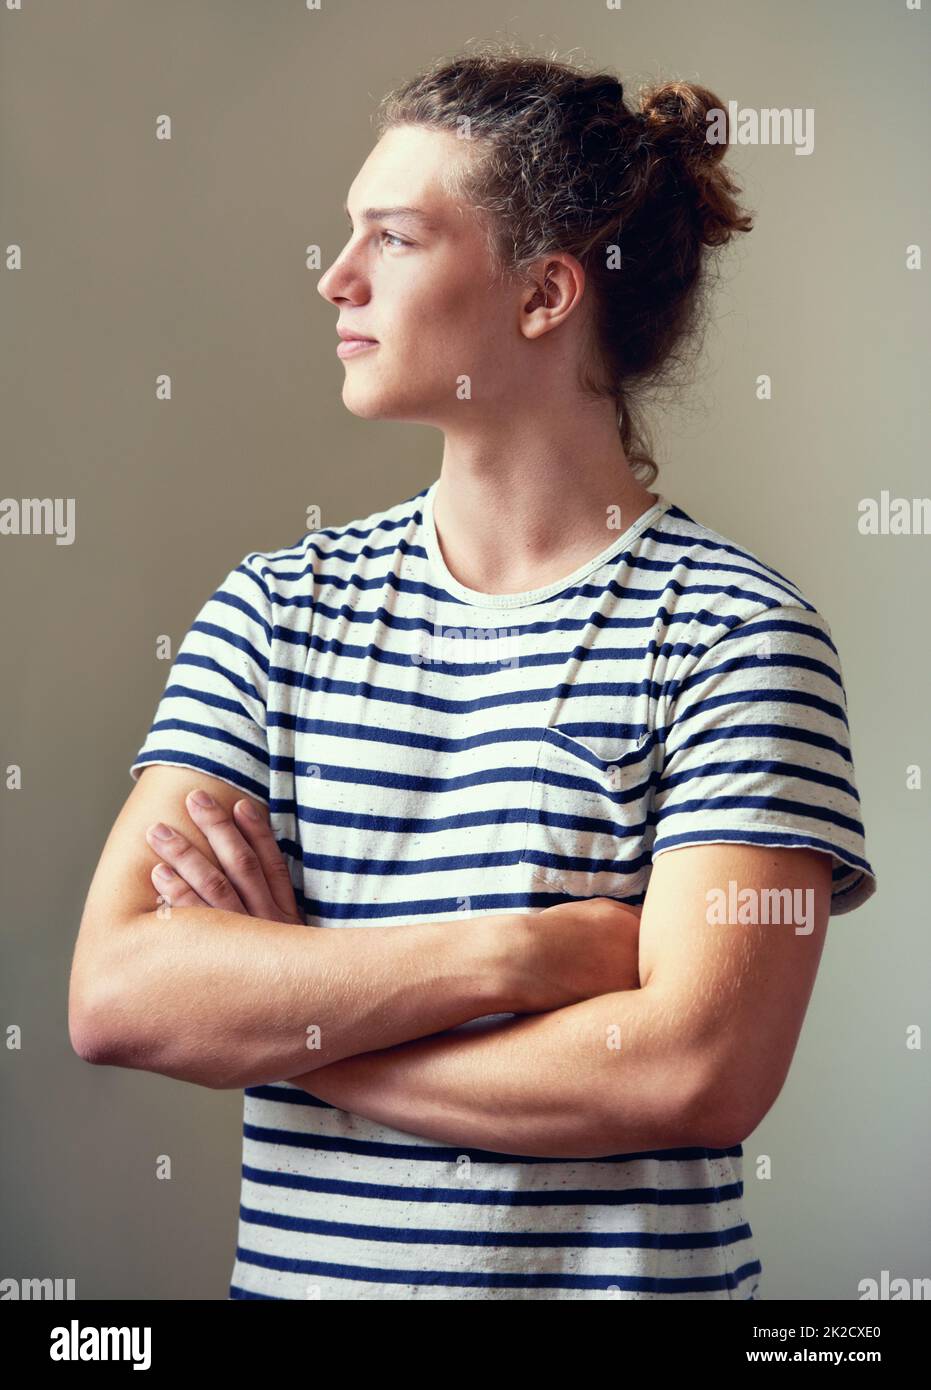 Feeling composed. Profile shot of a young man with his hair in a bun looking away. Stock Photo